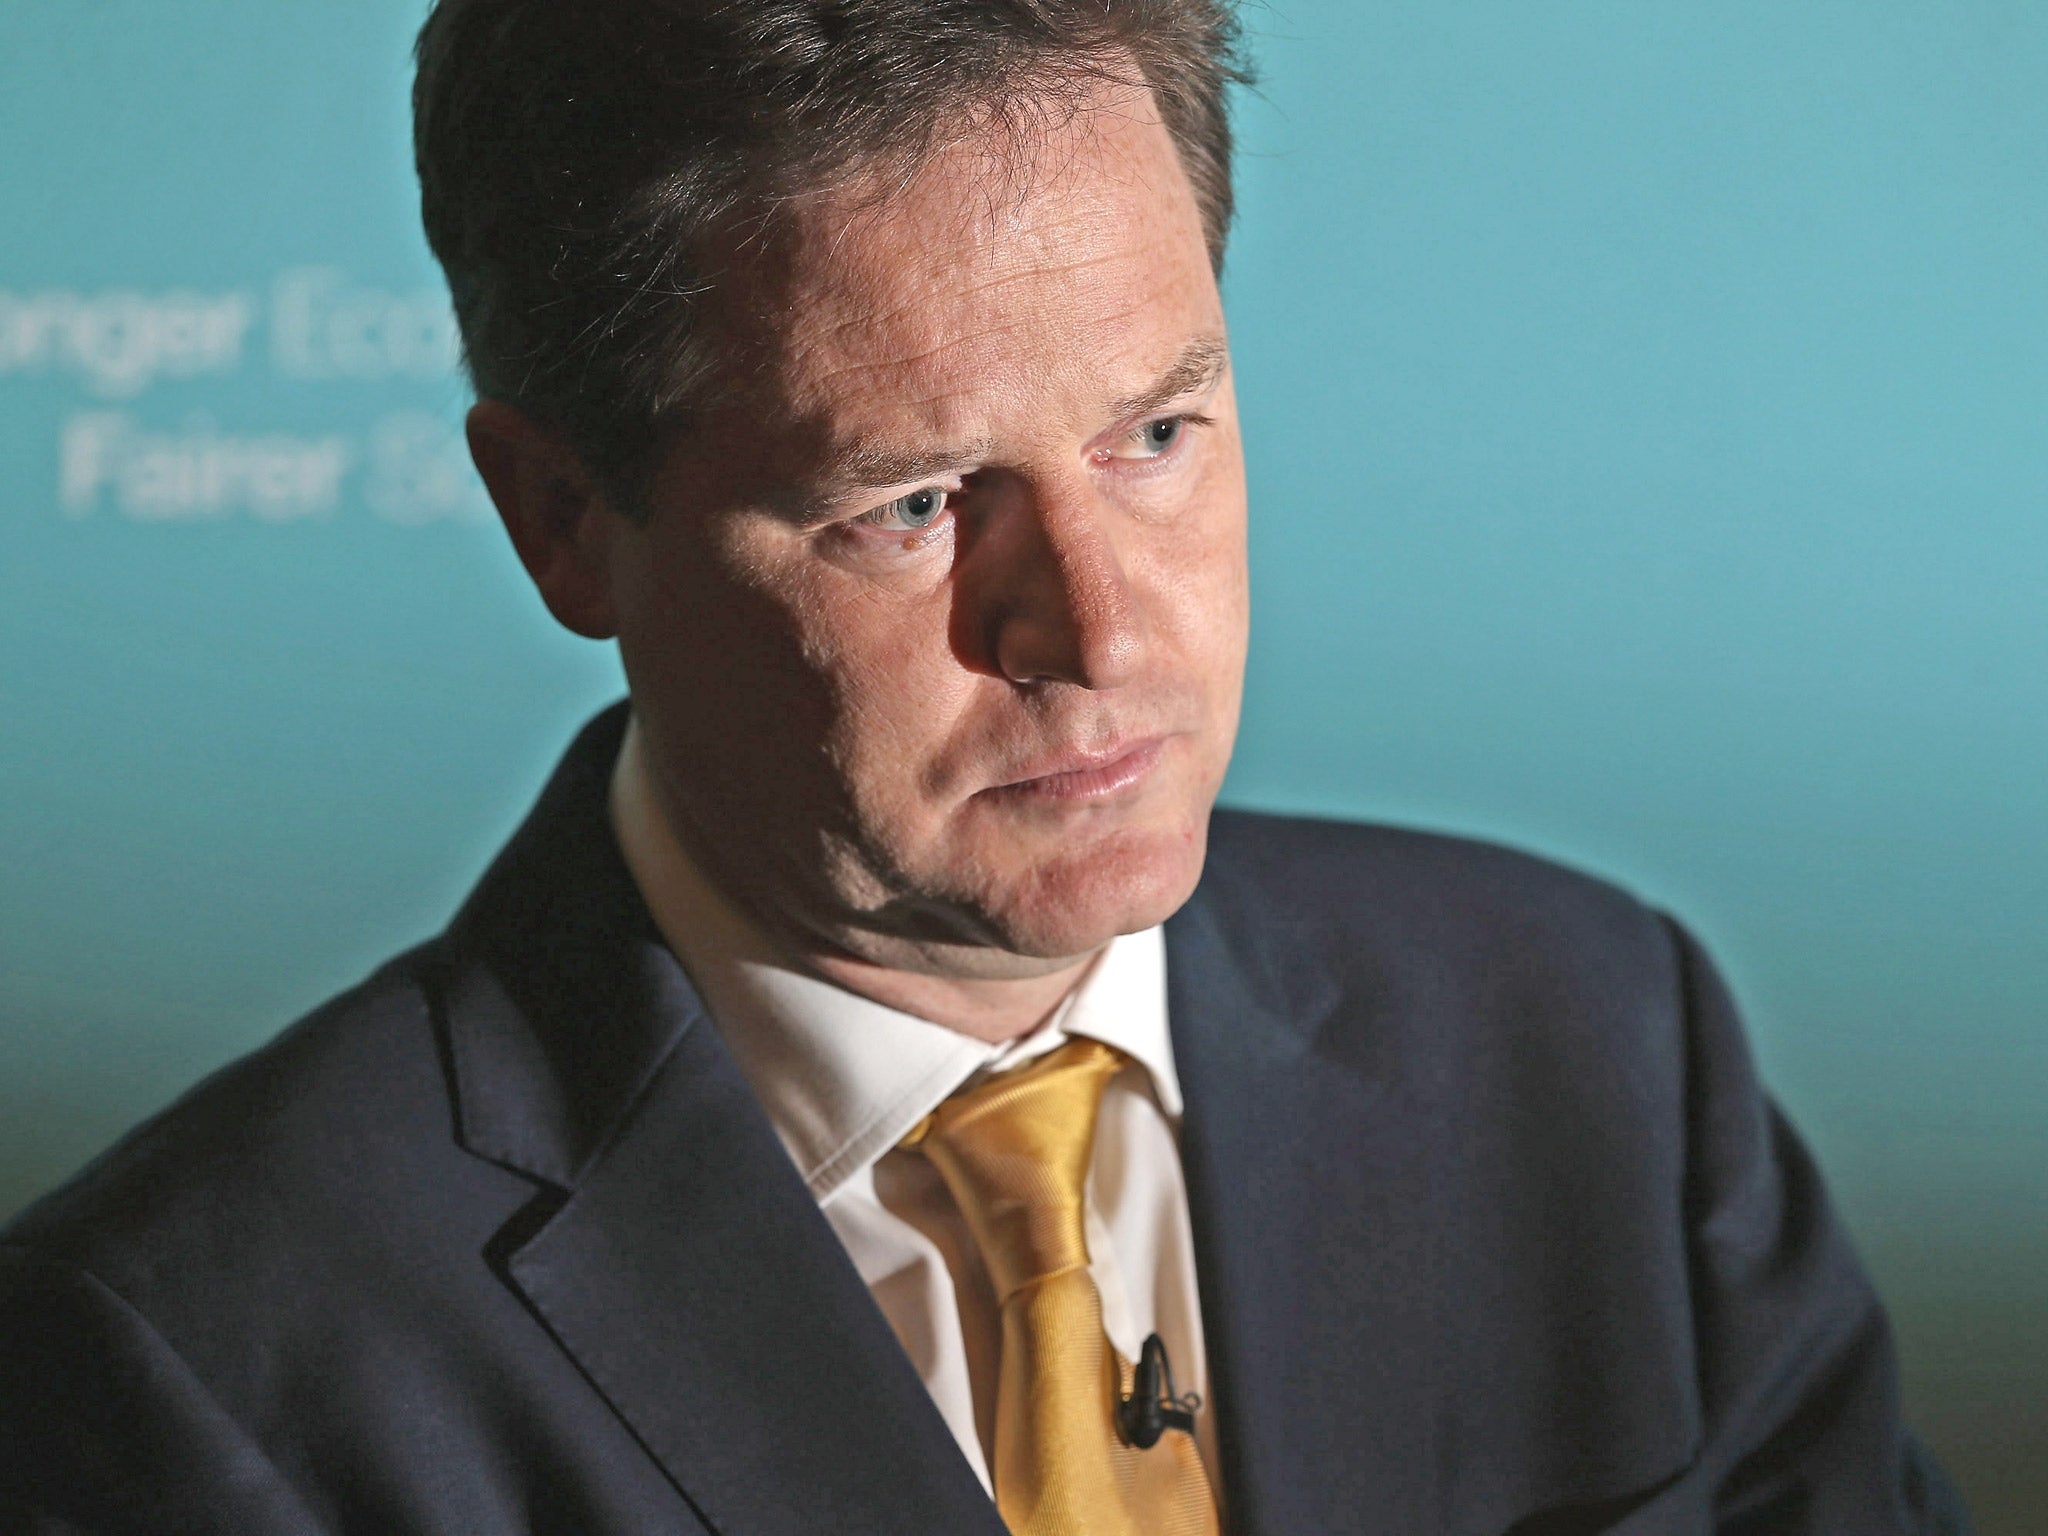 Nick Clegg is under pressure to set out a more distinctive economic policy